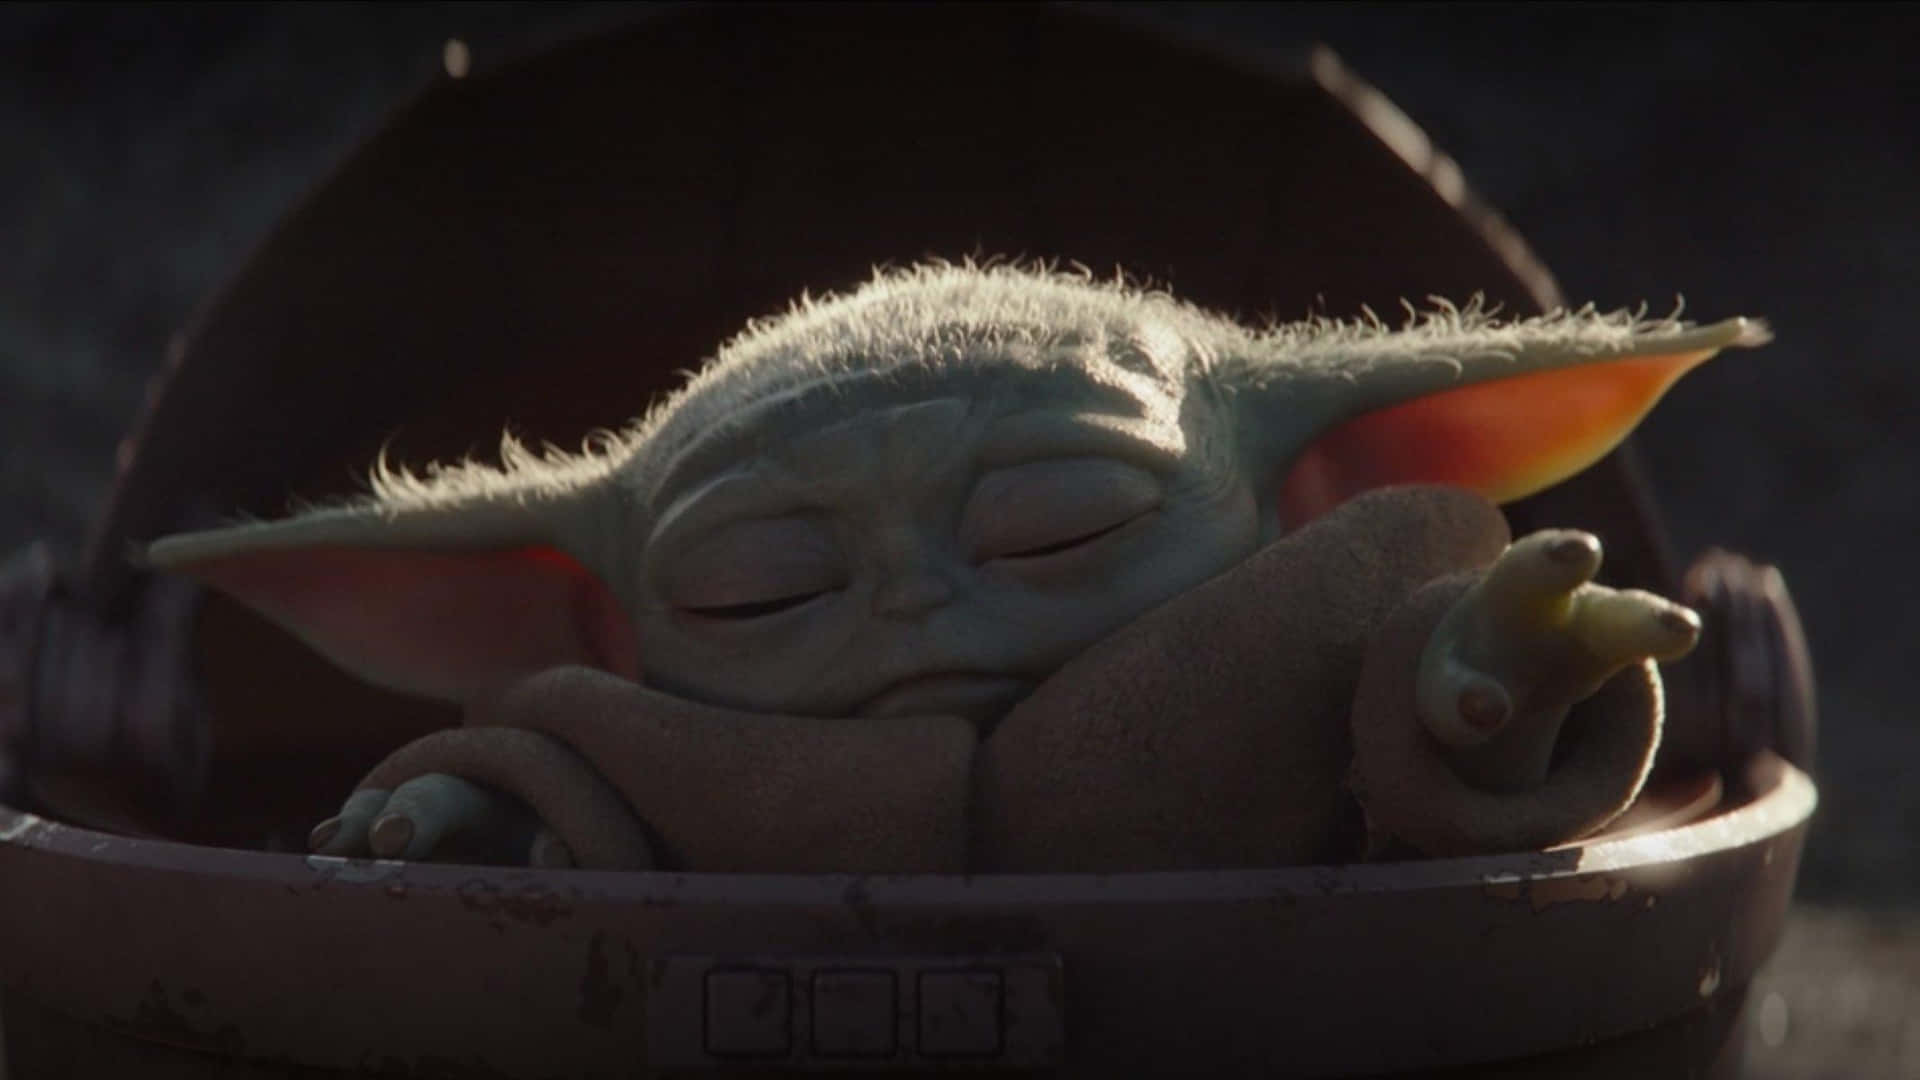 The Child, or “Baby Yoda”, from the popular TV show “The Mandalorian” Wallpaper